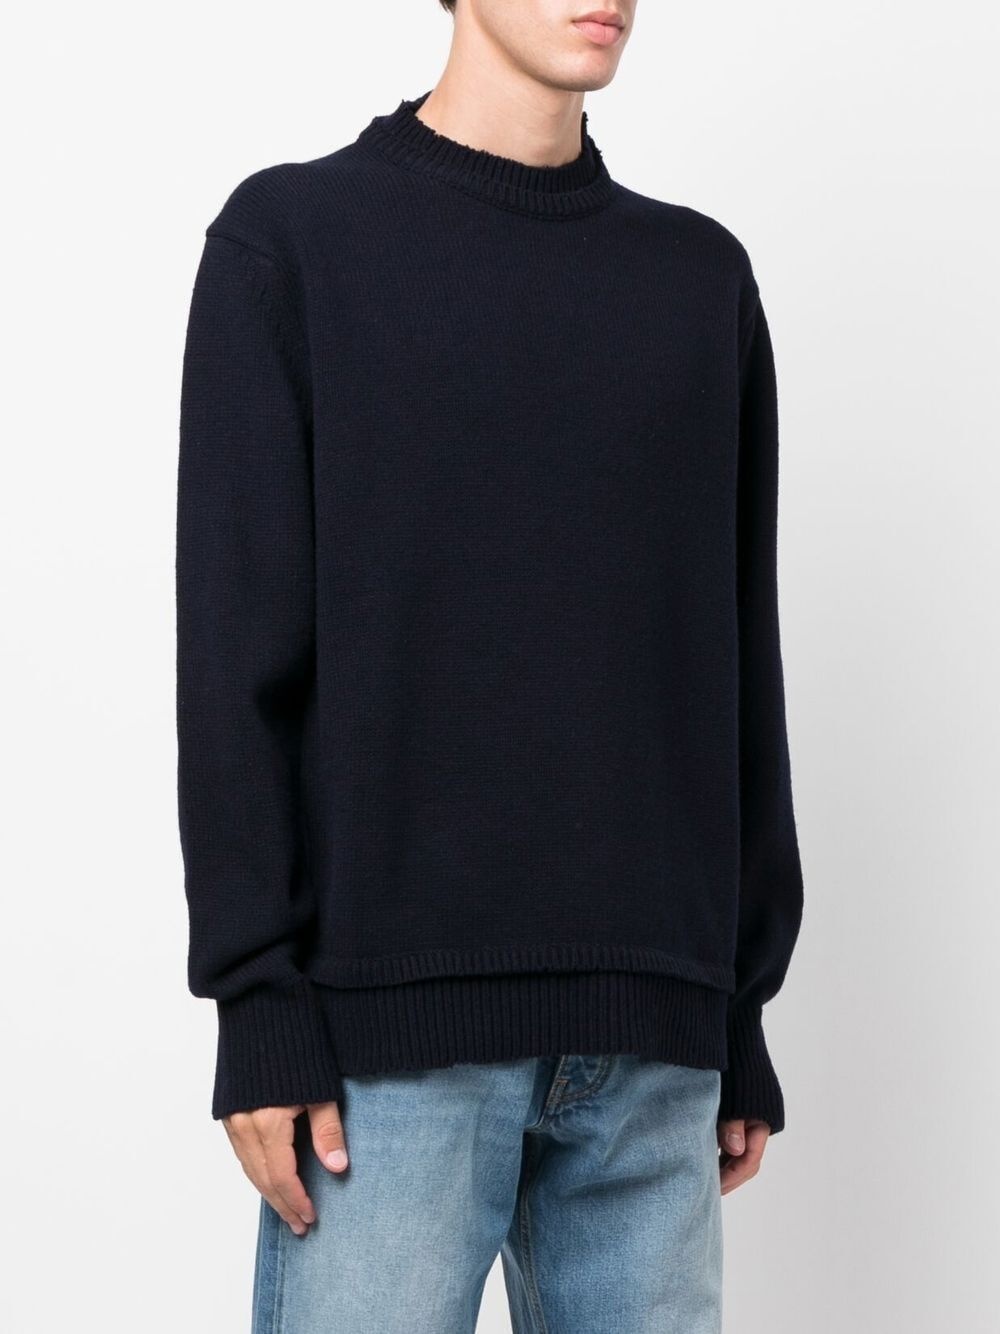 Elbow patch sweater - 3